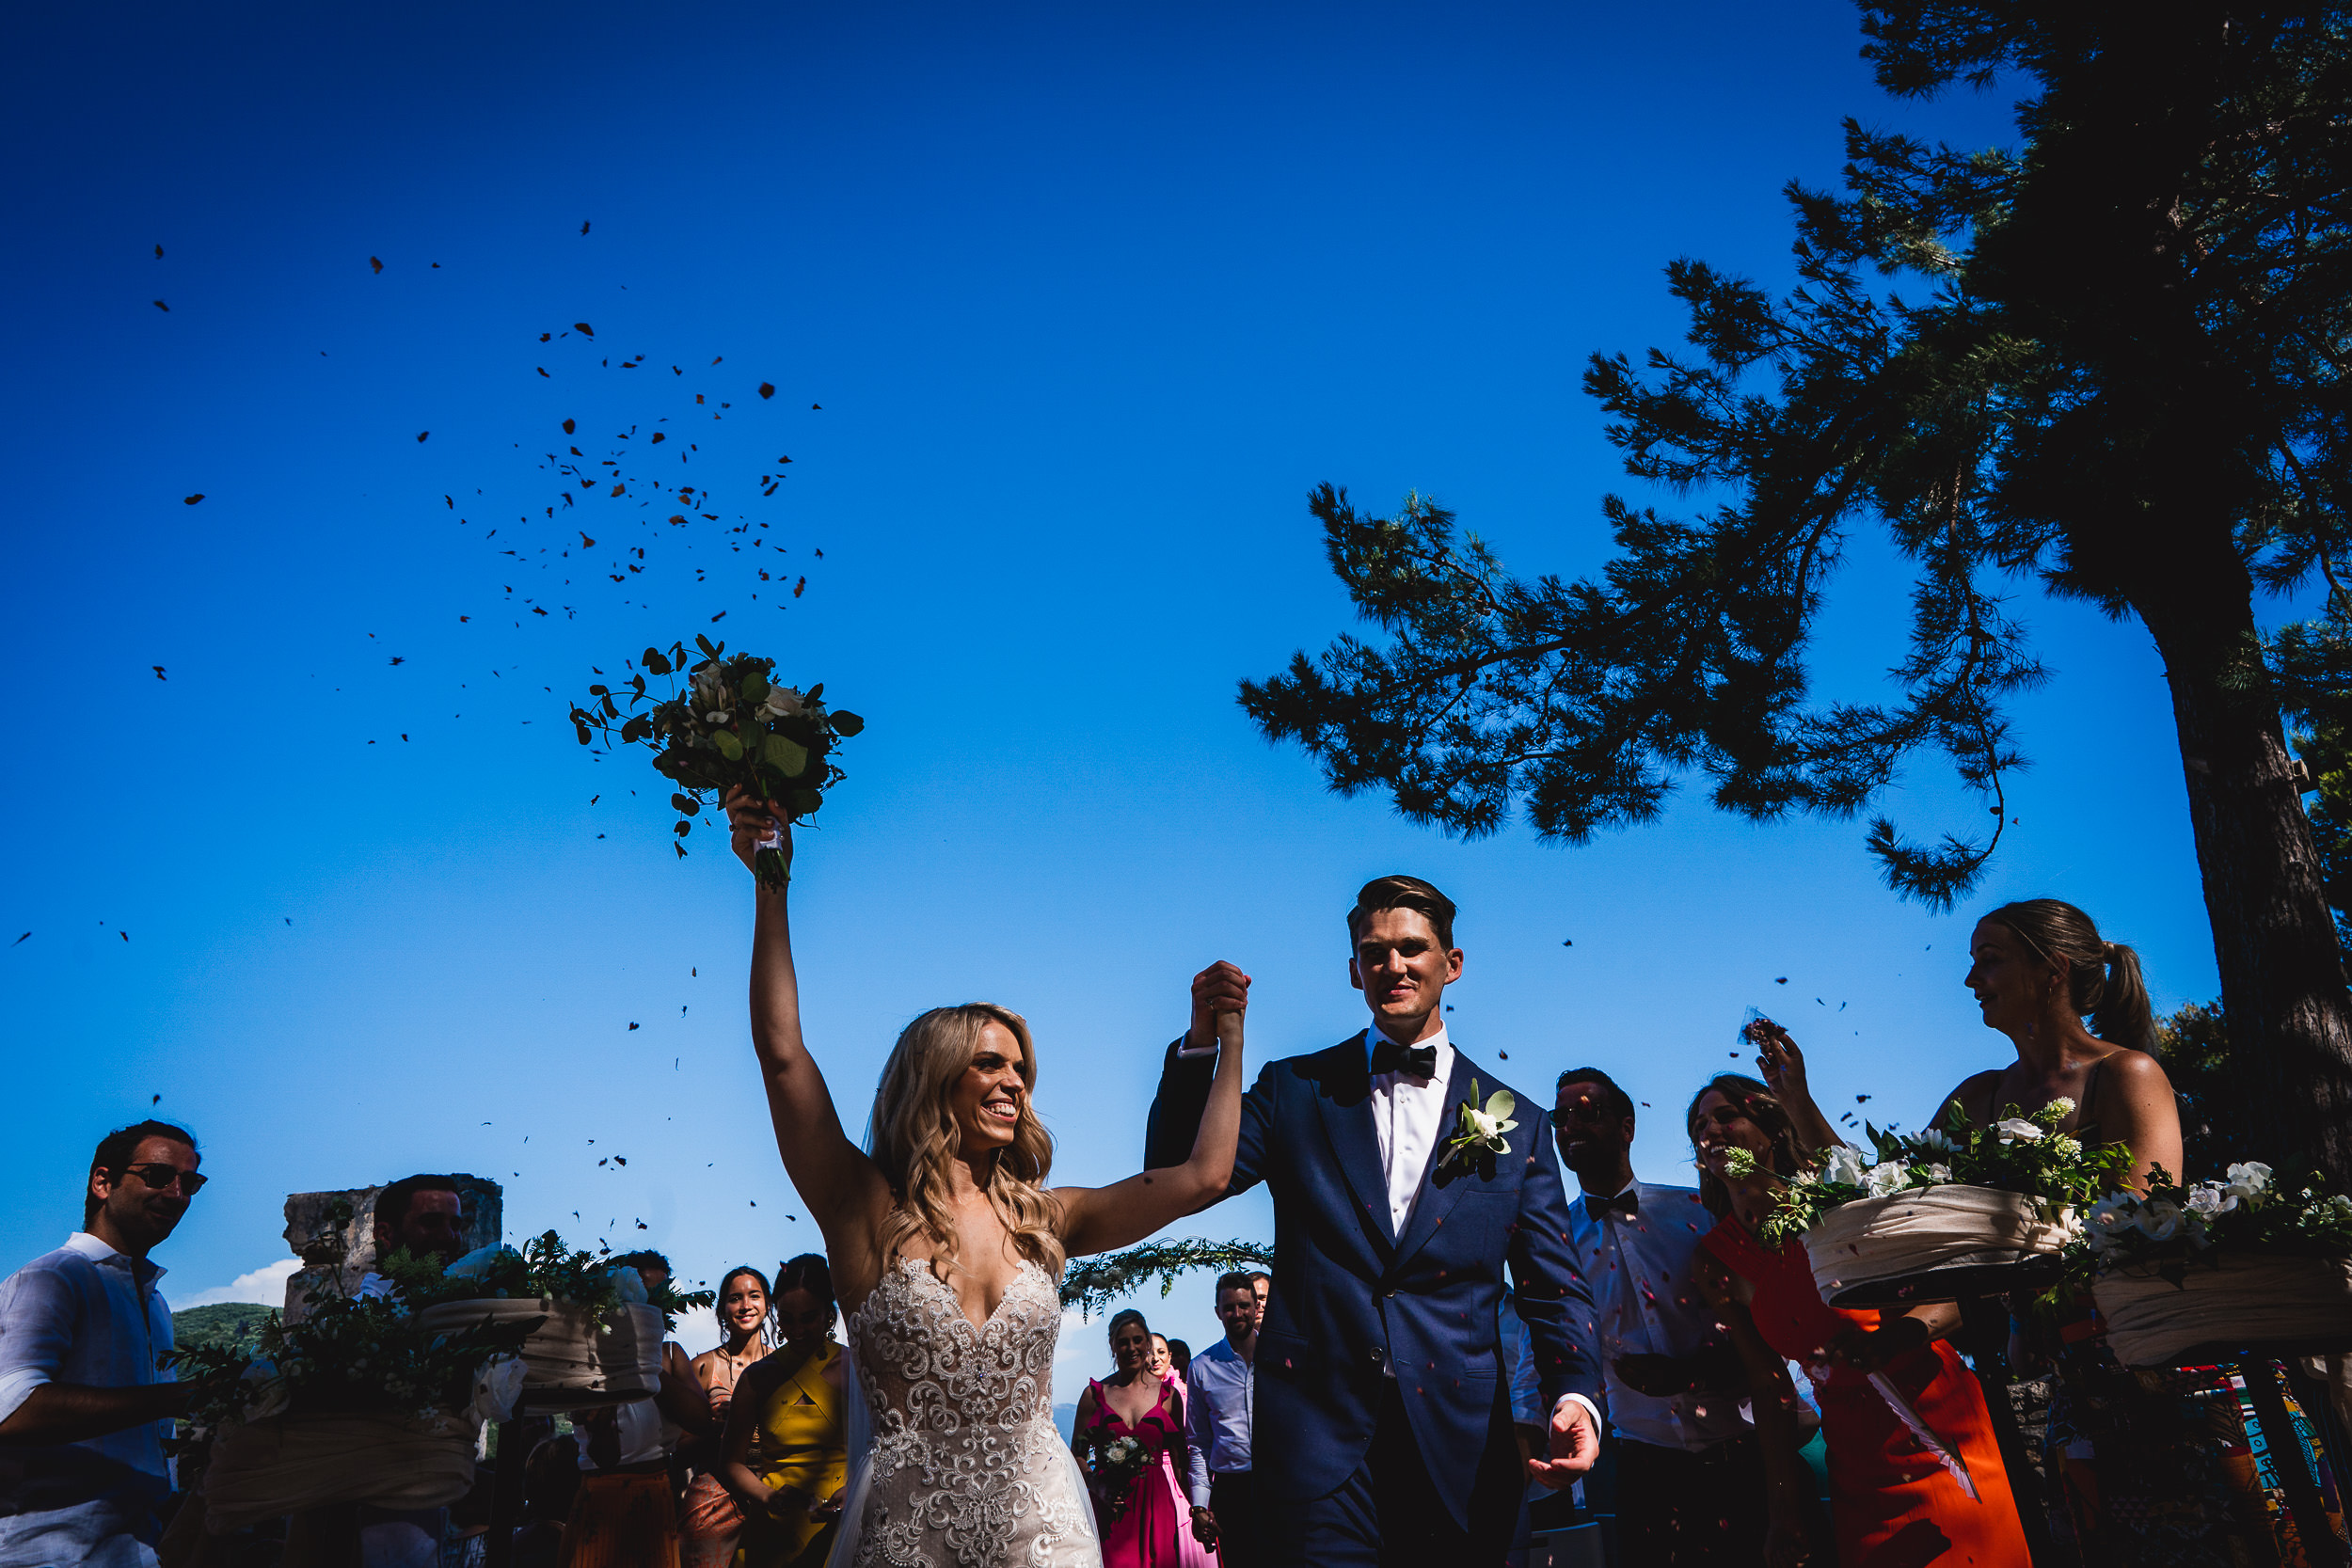 A wedding photographer captures a bride and groom playfully throwing confetti during their ceremony.